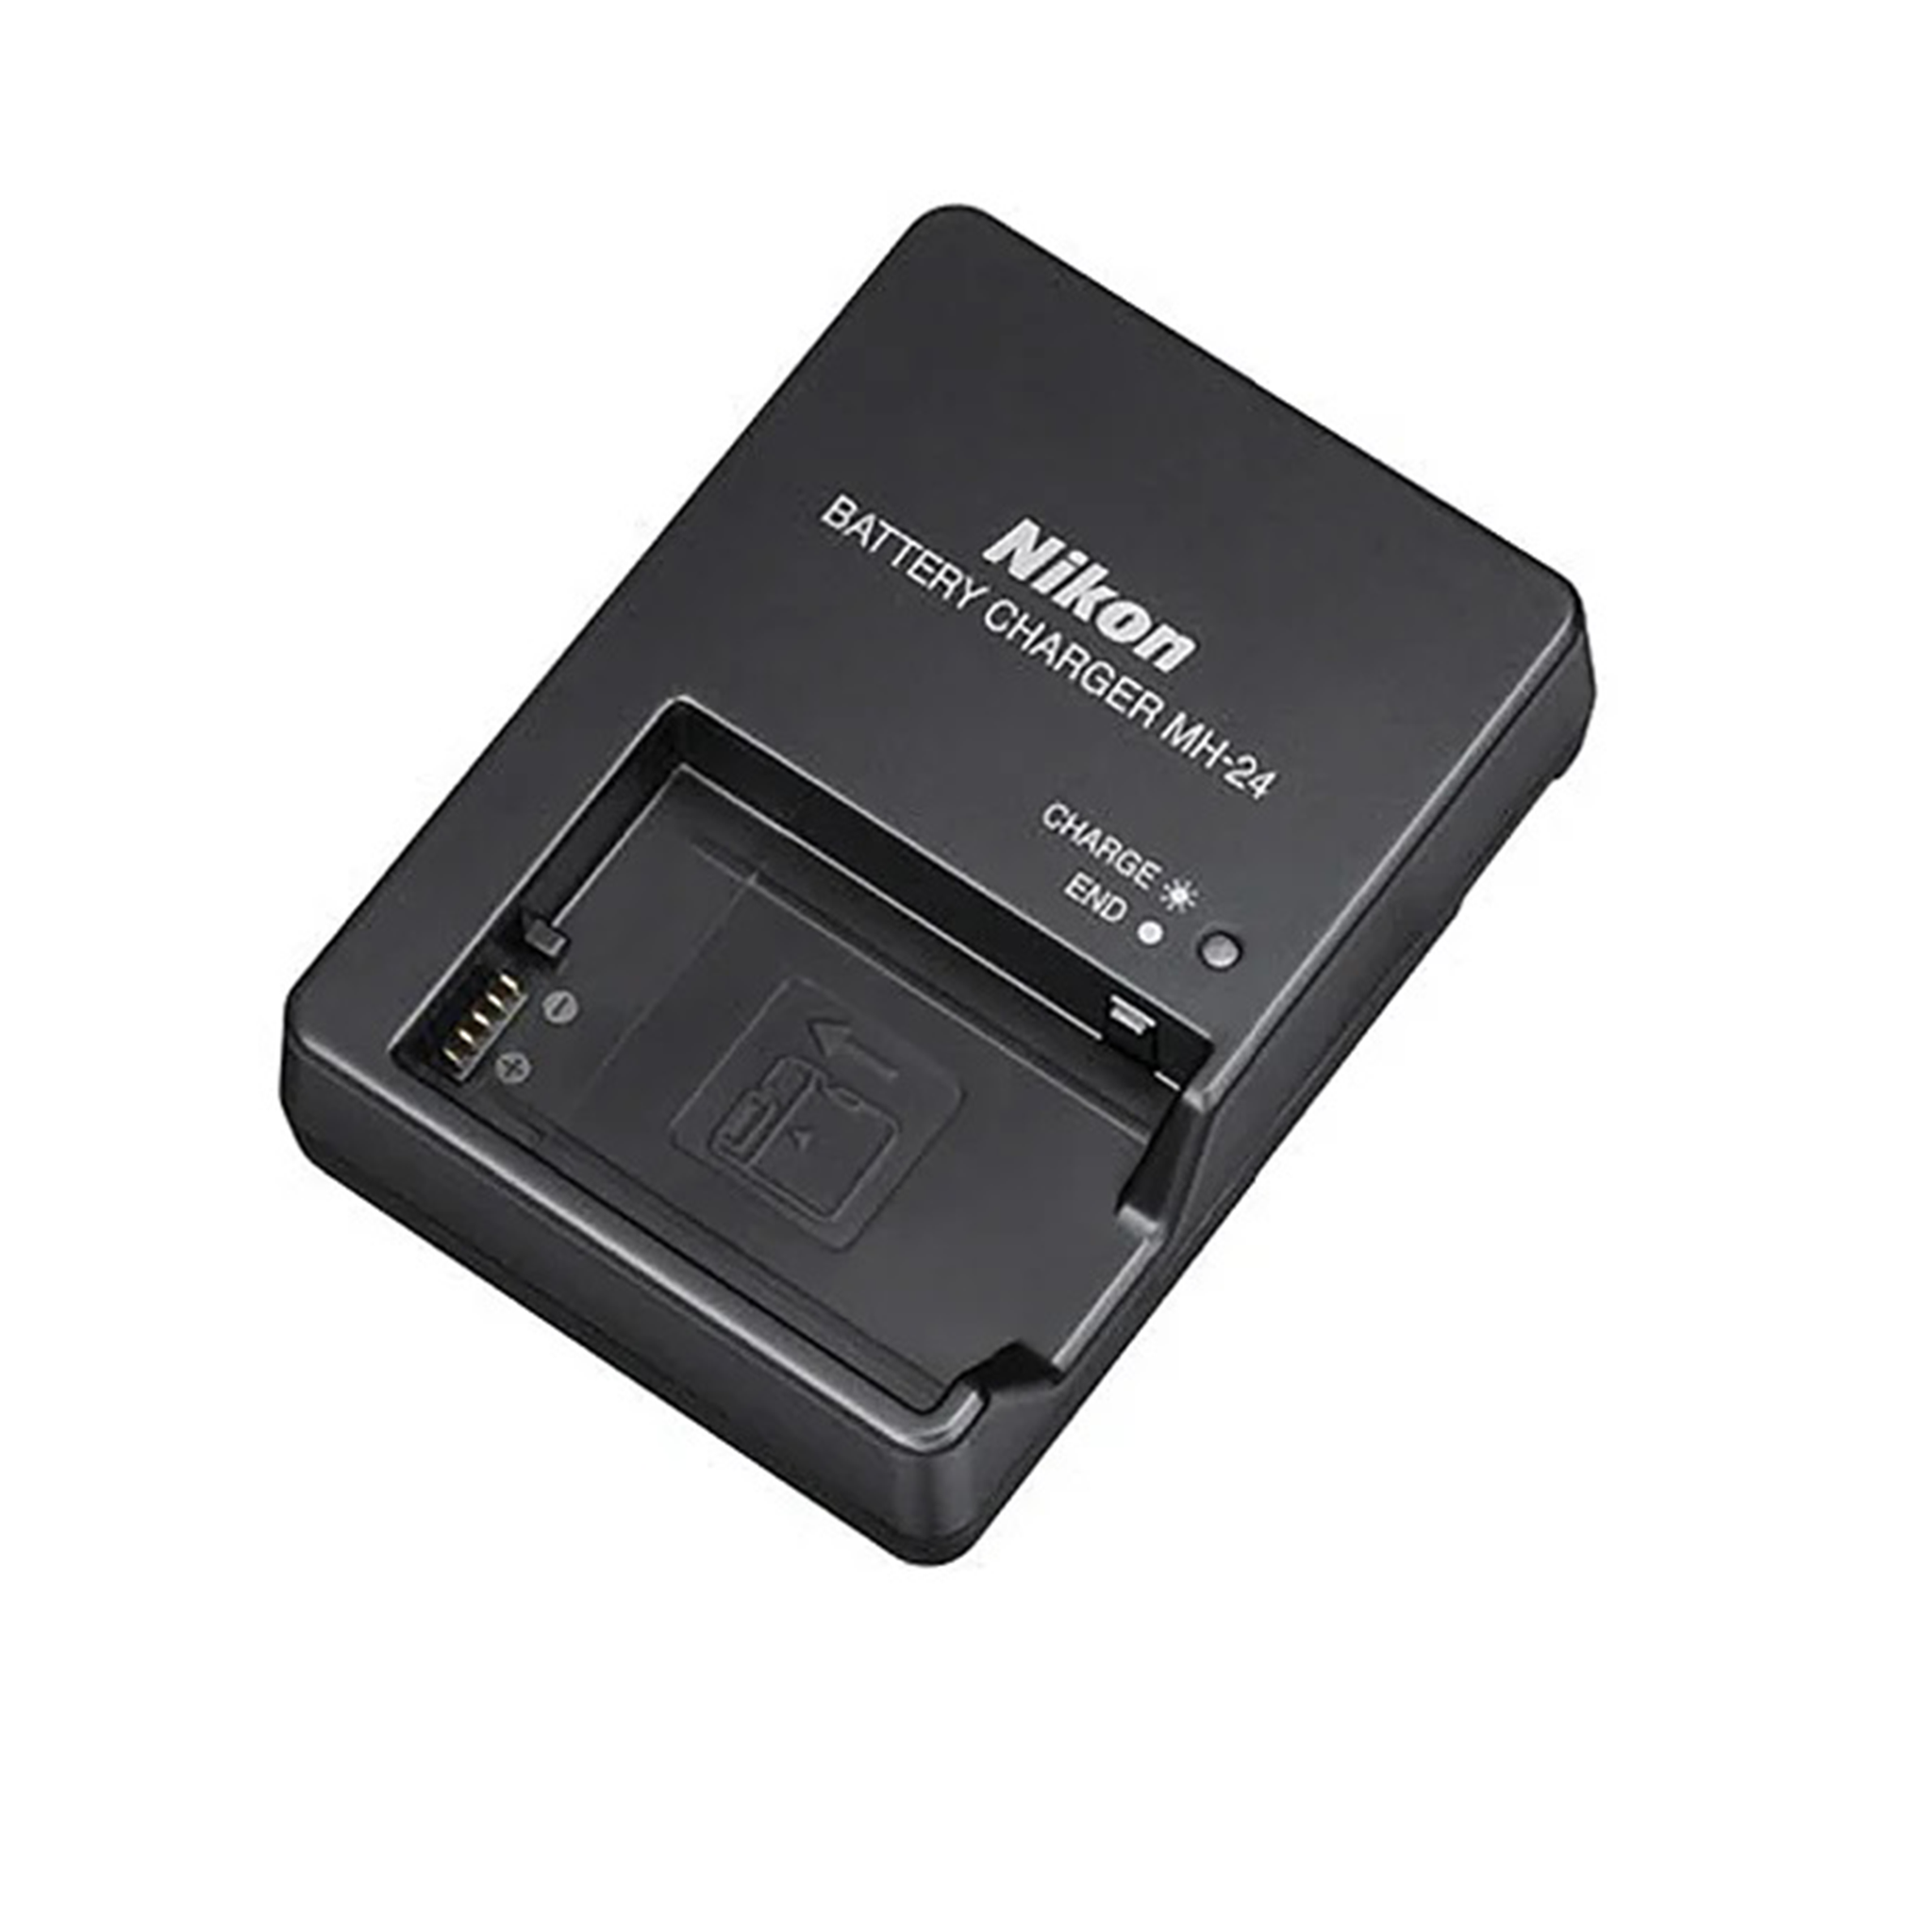 Nikon MH-24 Battery Charger-Camera Accessories-futuromic